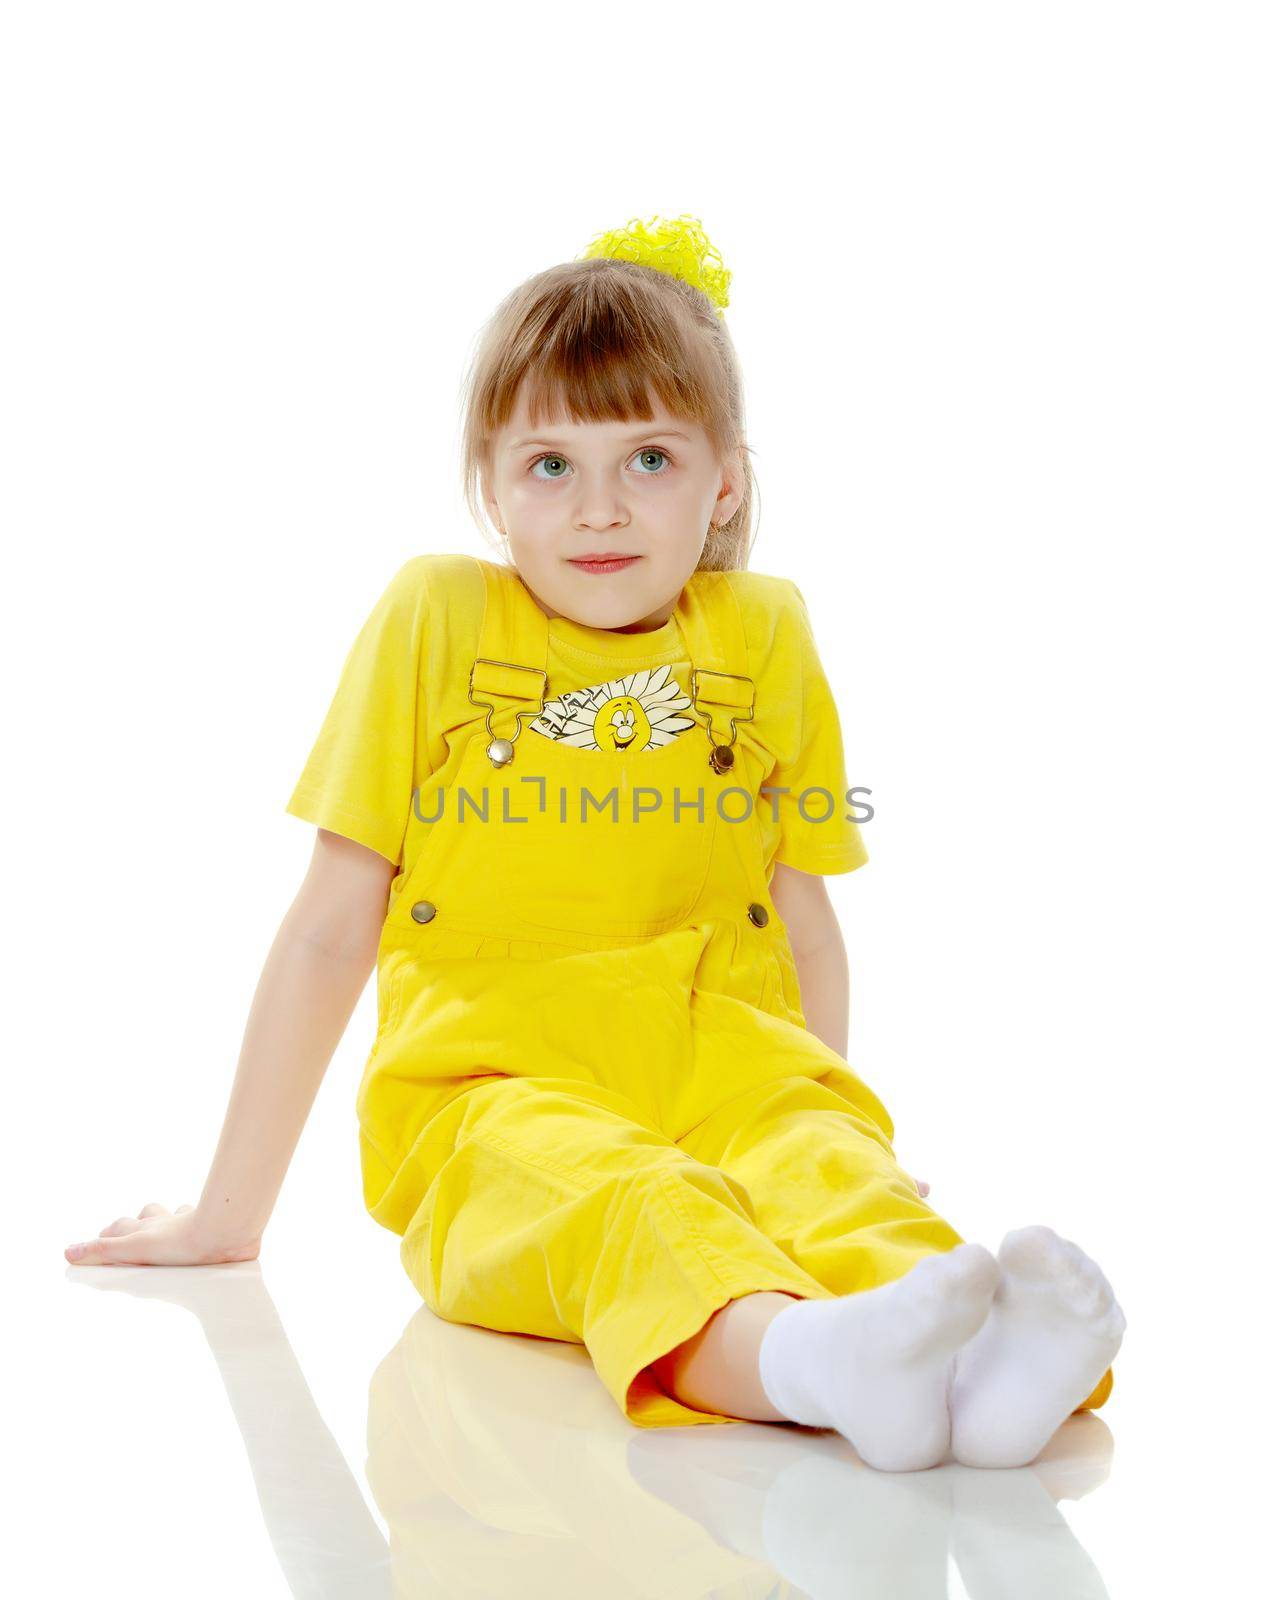 Girl with a short bangs on her head and bright yellow overalls. by kolesnikov_studio